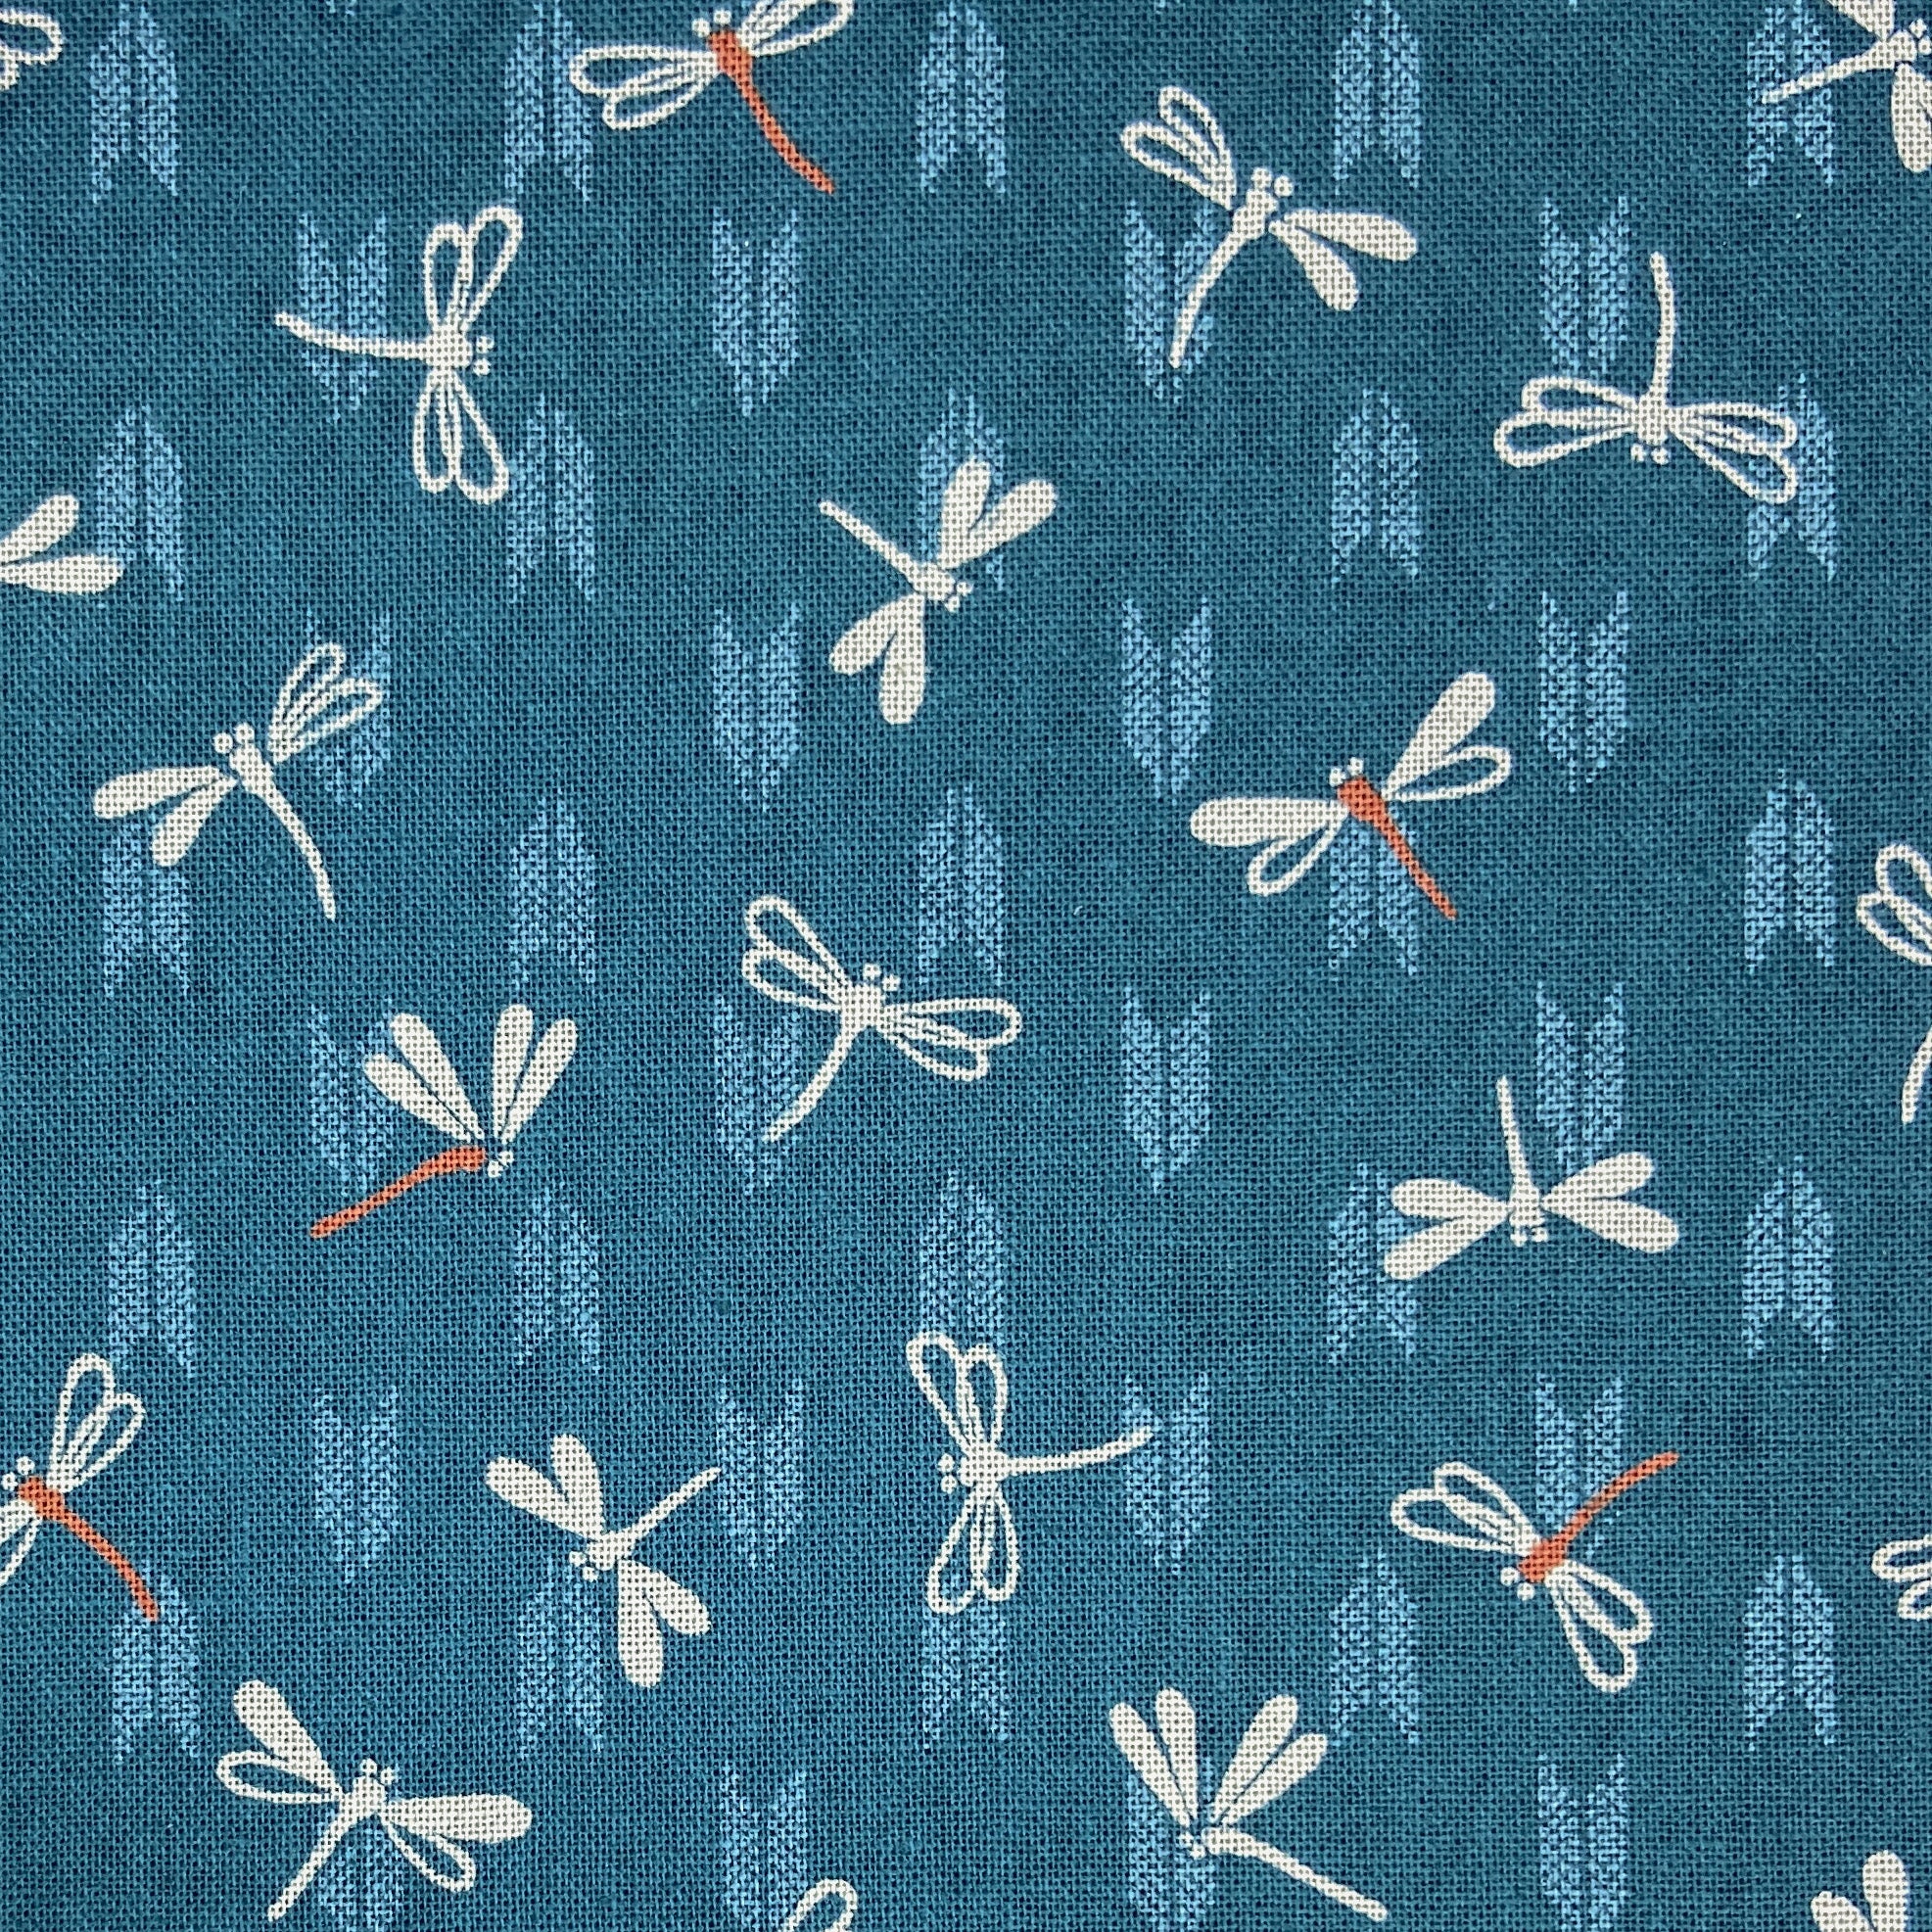 Japanese Cotton Sheeting Print - Dragonflies with Arrows Teal